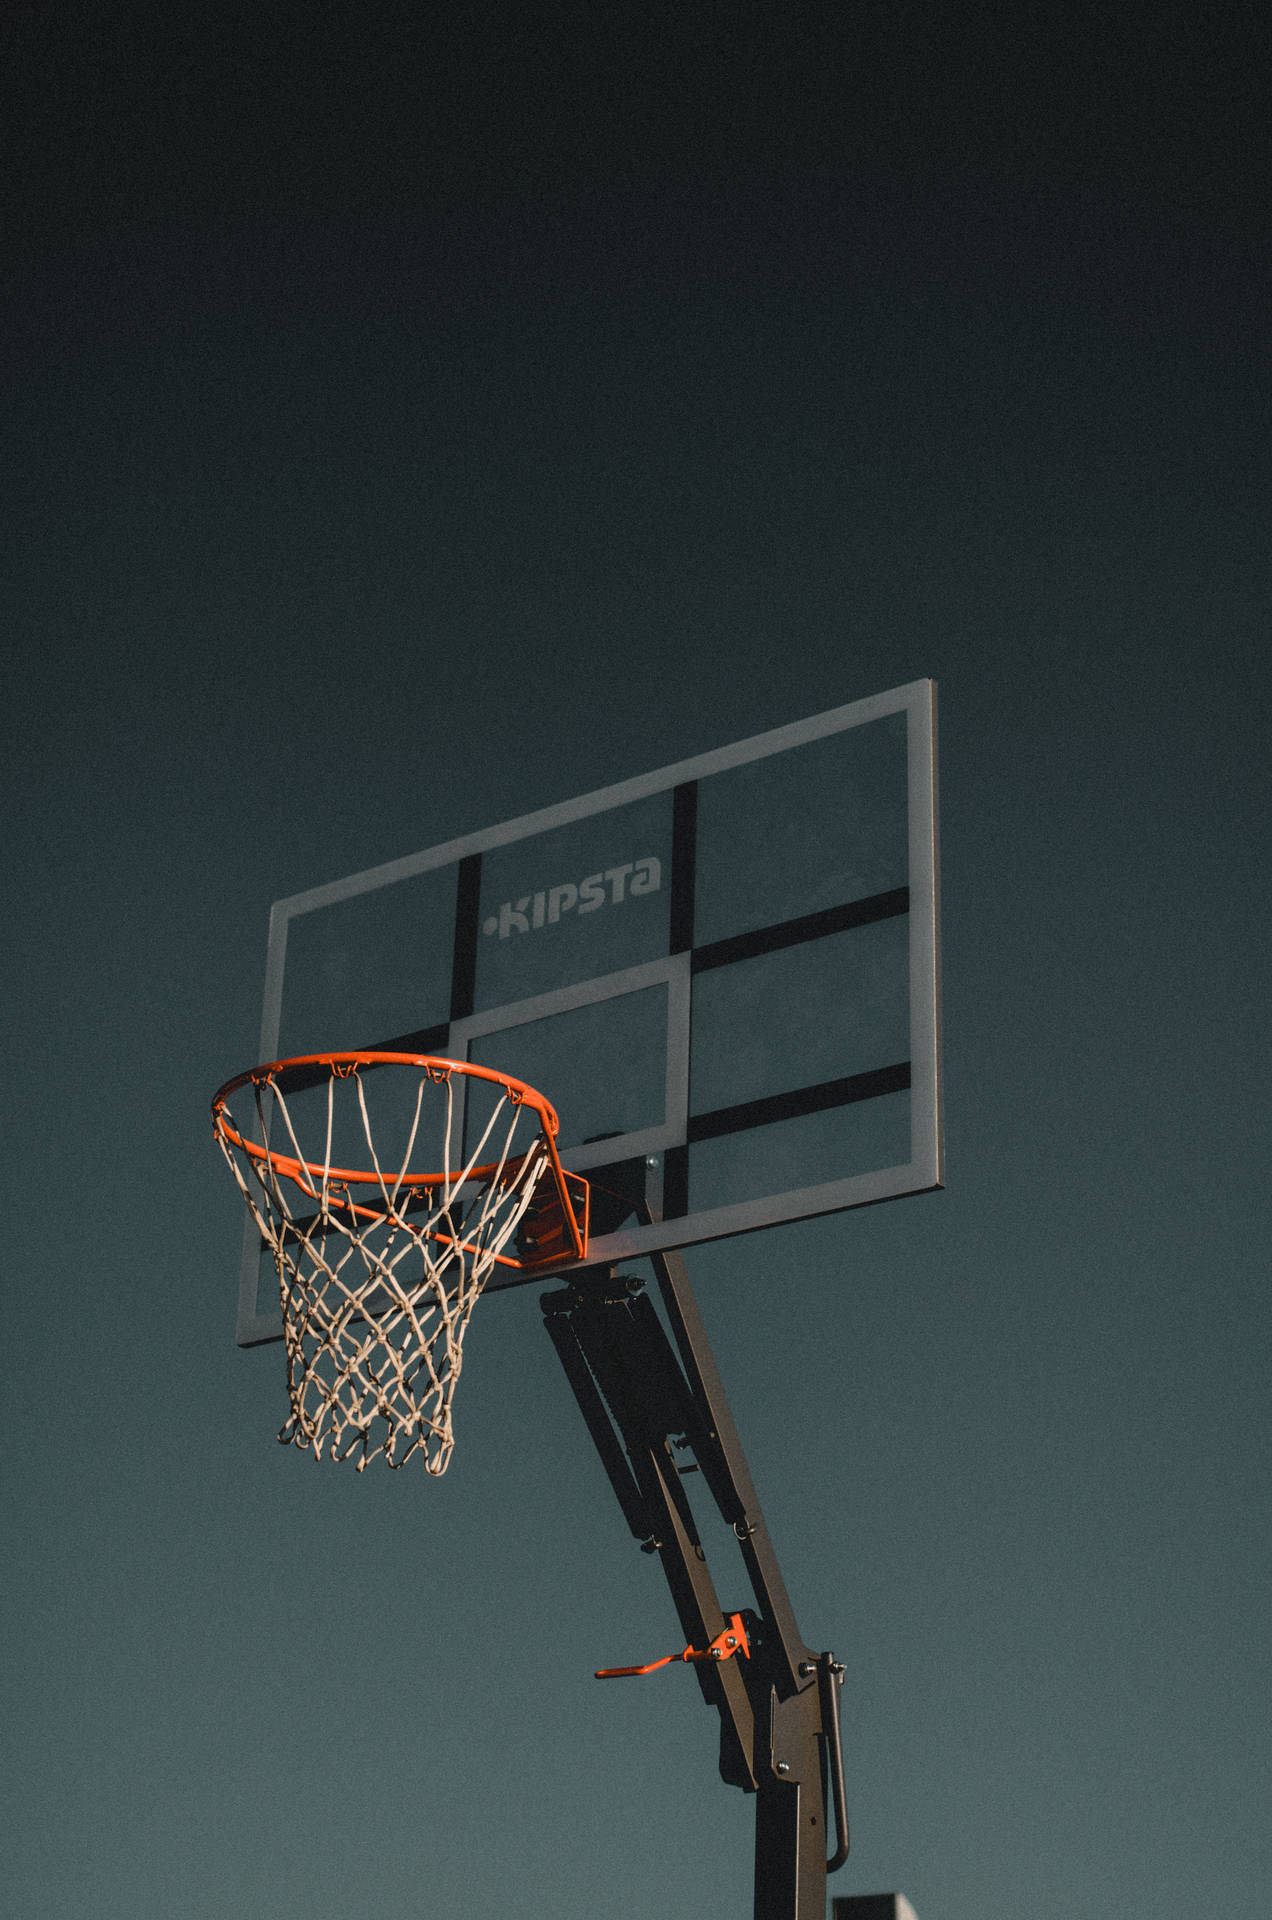 3077X4645 Basketball Wallpaper and Background